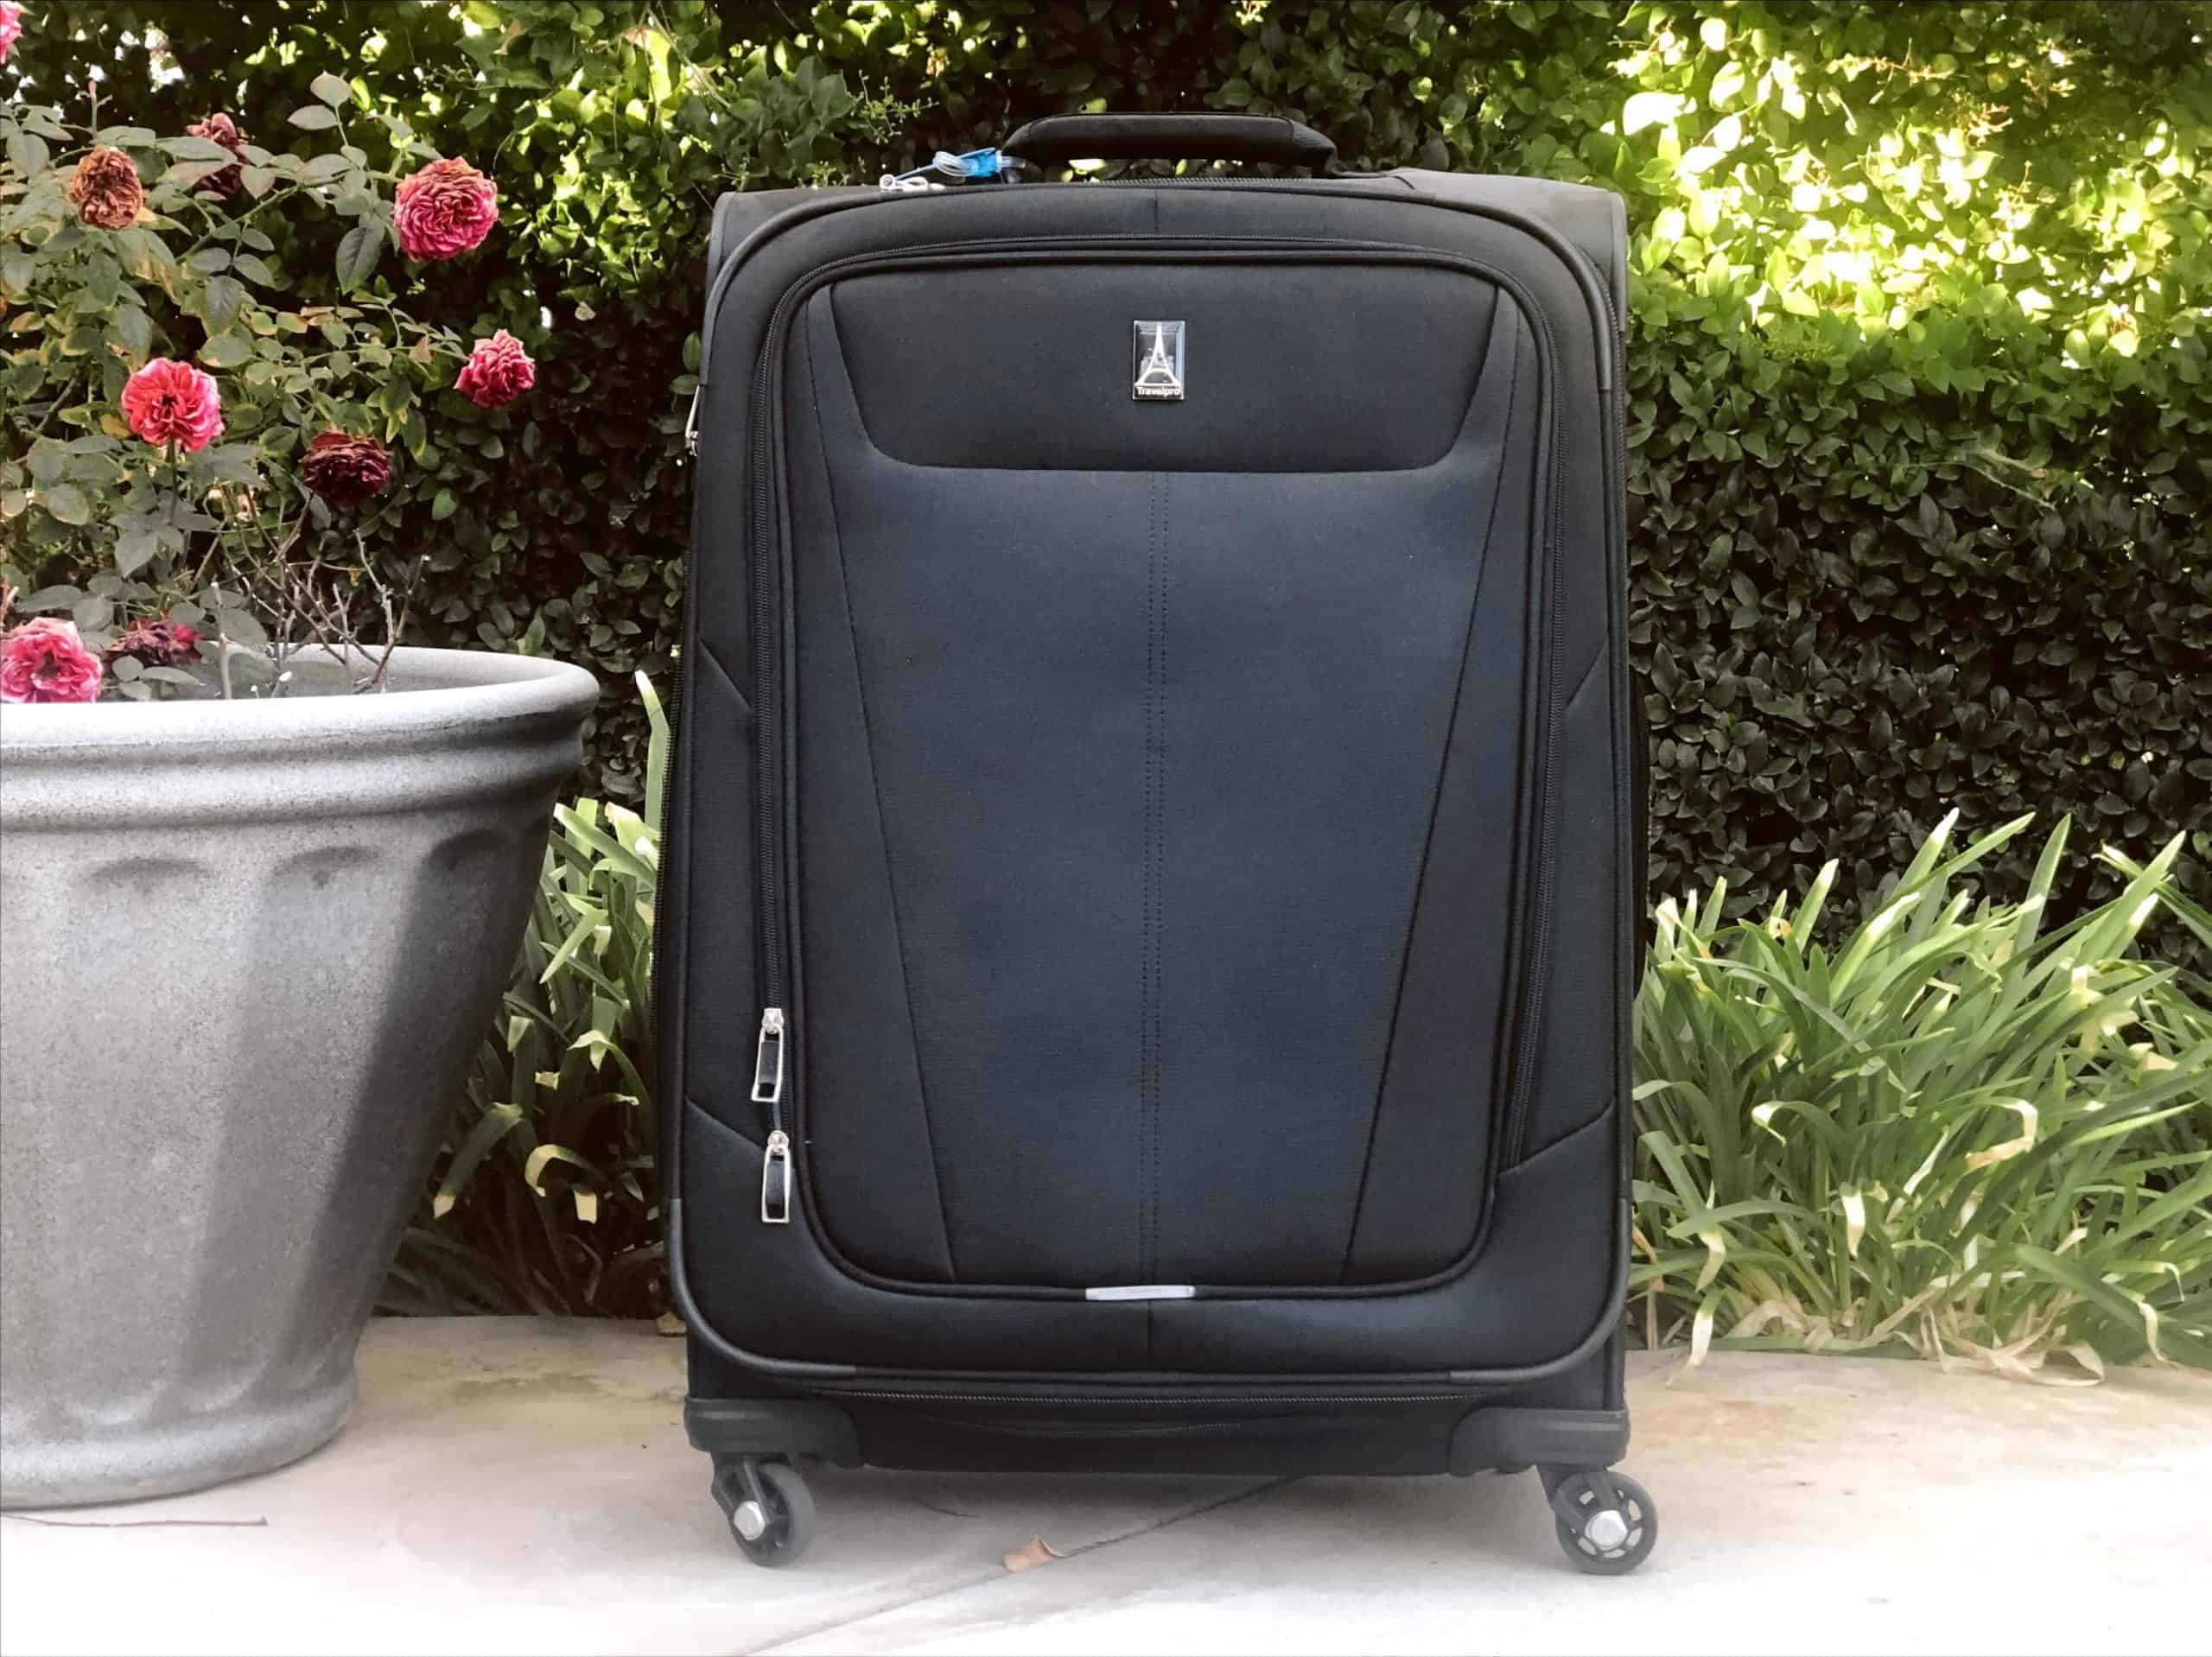 Travelpro MaxLite 5 Review: This Should Be Your Go-to Suitcase